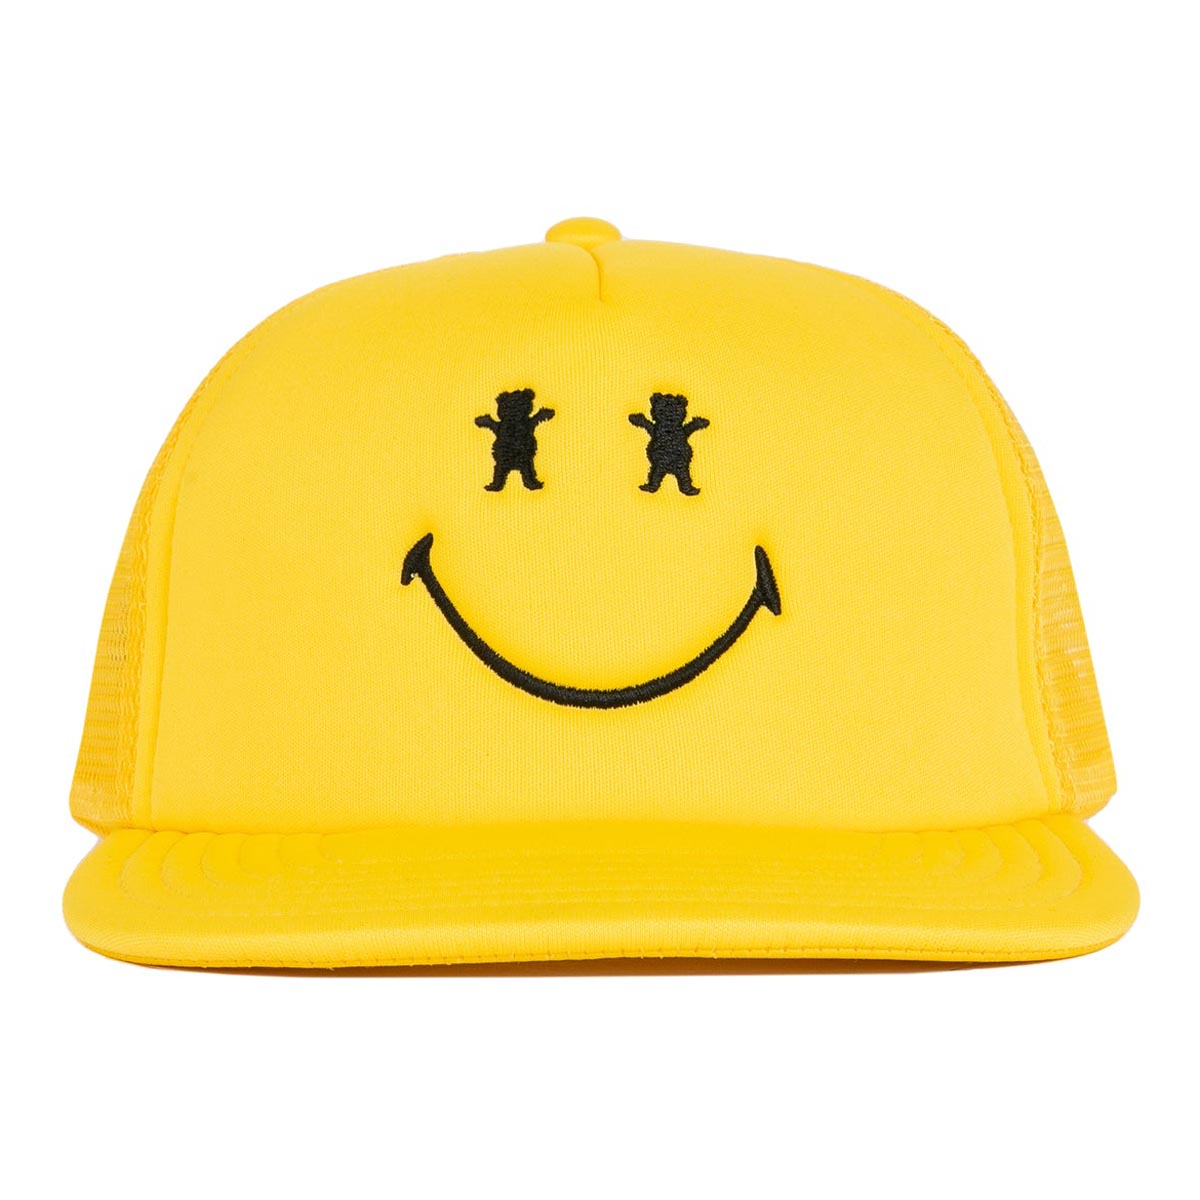 Grizzly x Smiley World Big Smile Trucker Snapback Hat - Yellow image 2